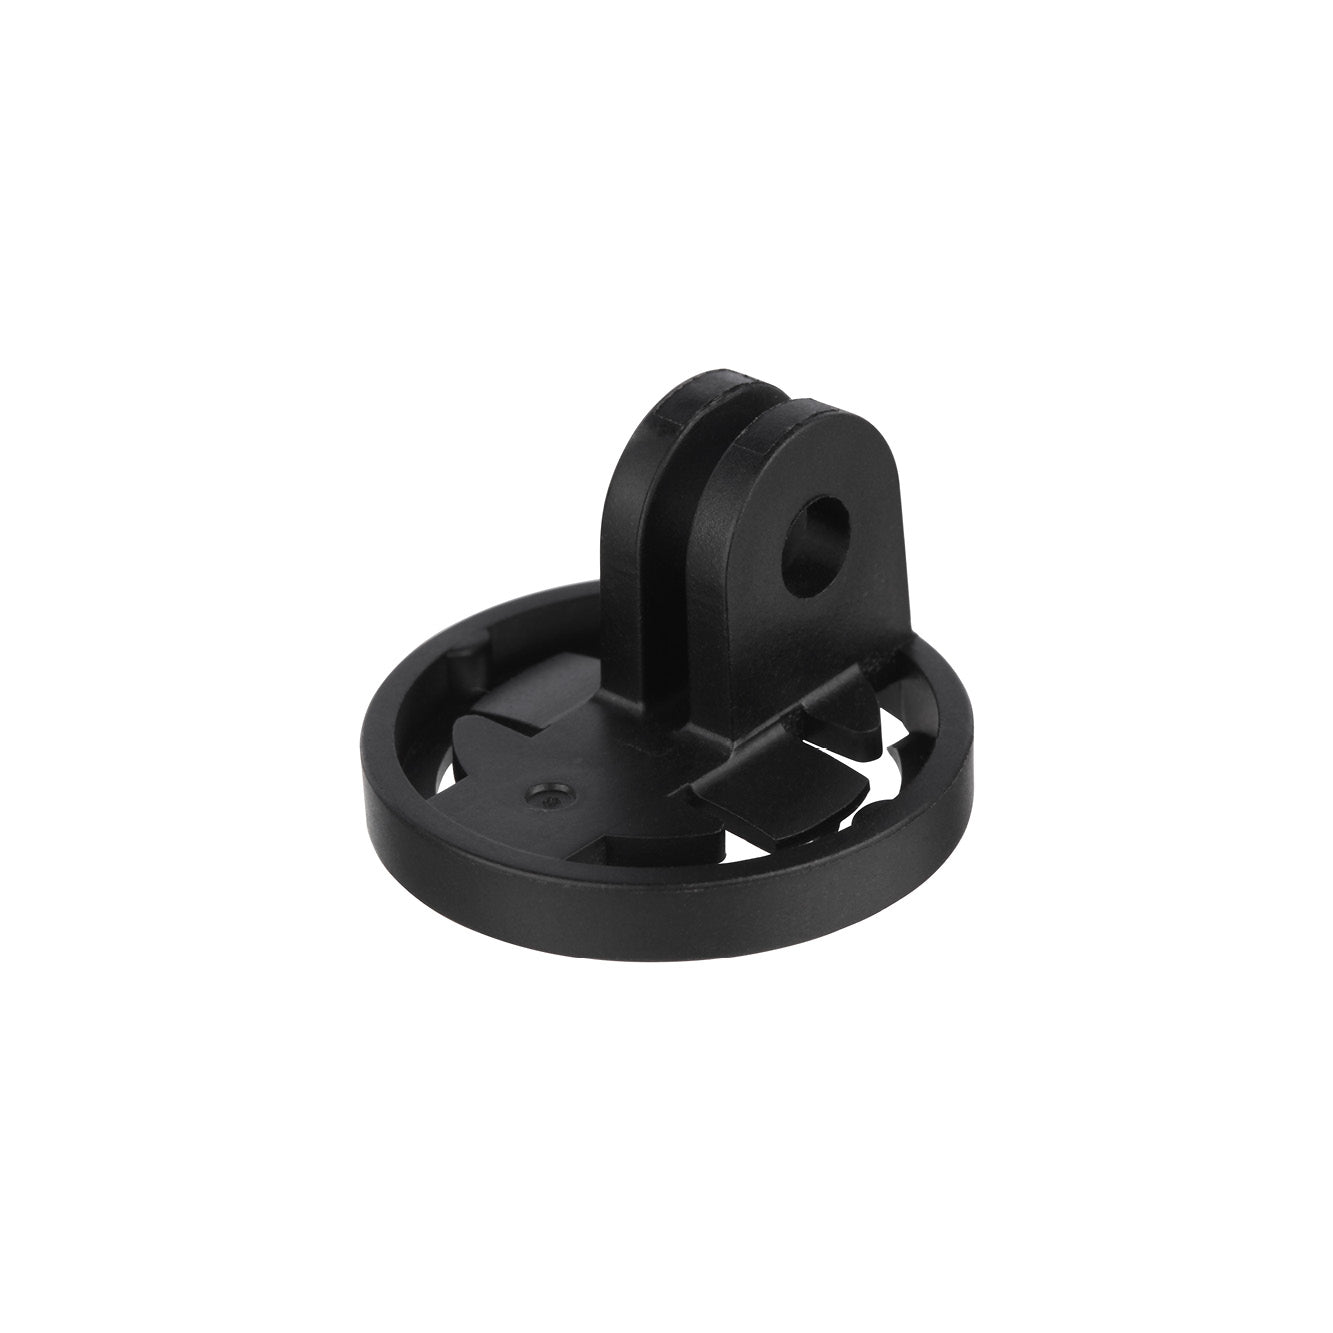 BEAM Action Camera Style Adapter